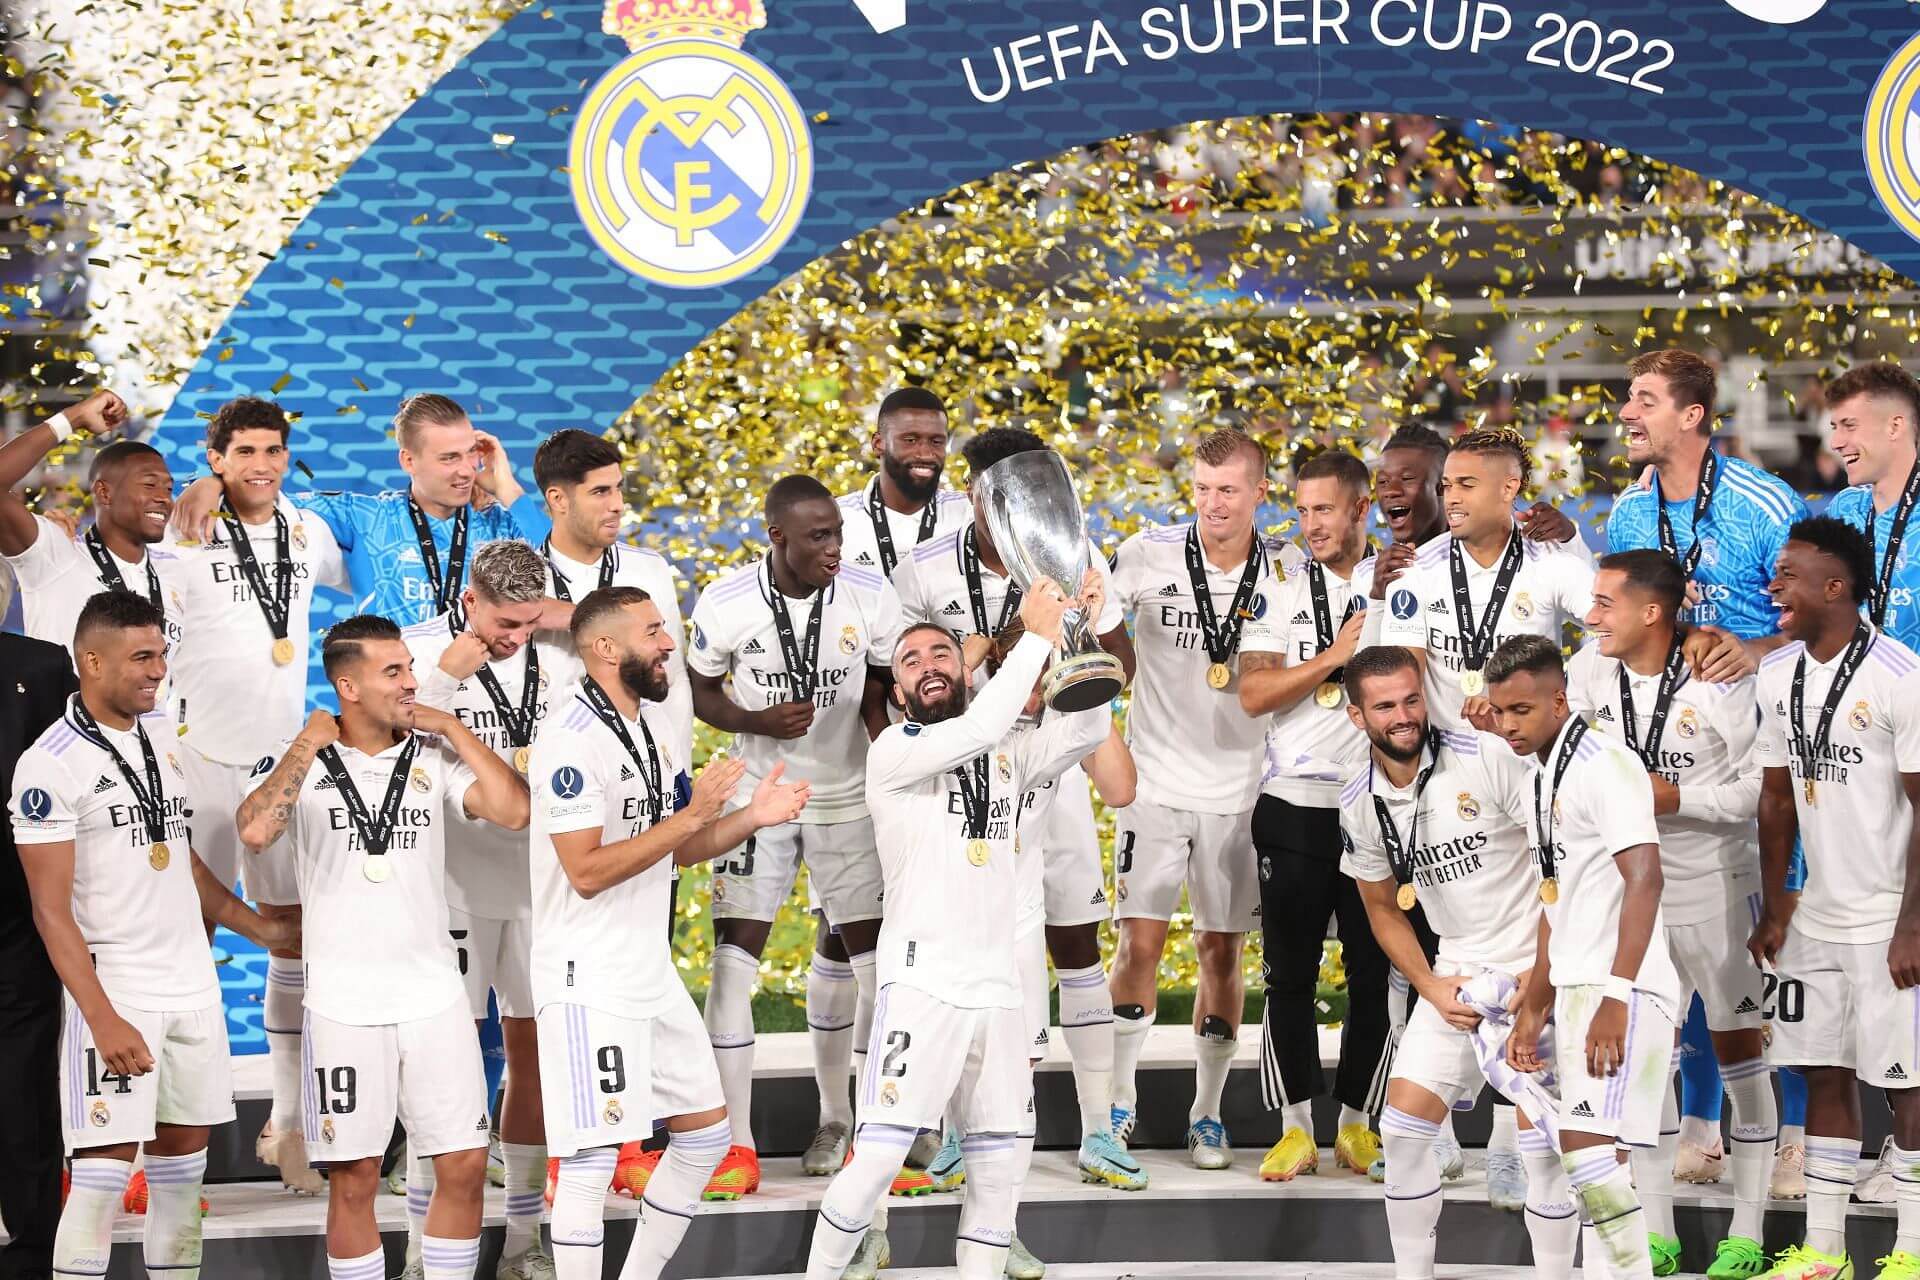 The European Super Cup is one of the mainstays of the record won by Madrid with Florentino at the helm. In Helsinki, he is looking for the